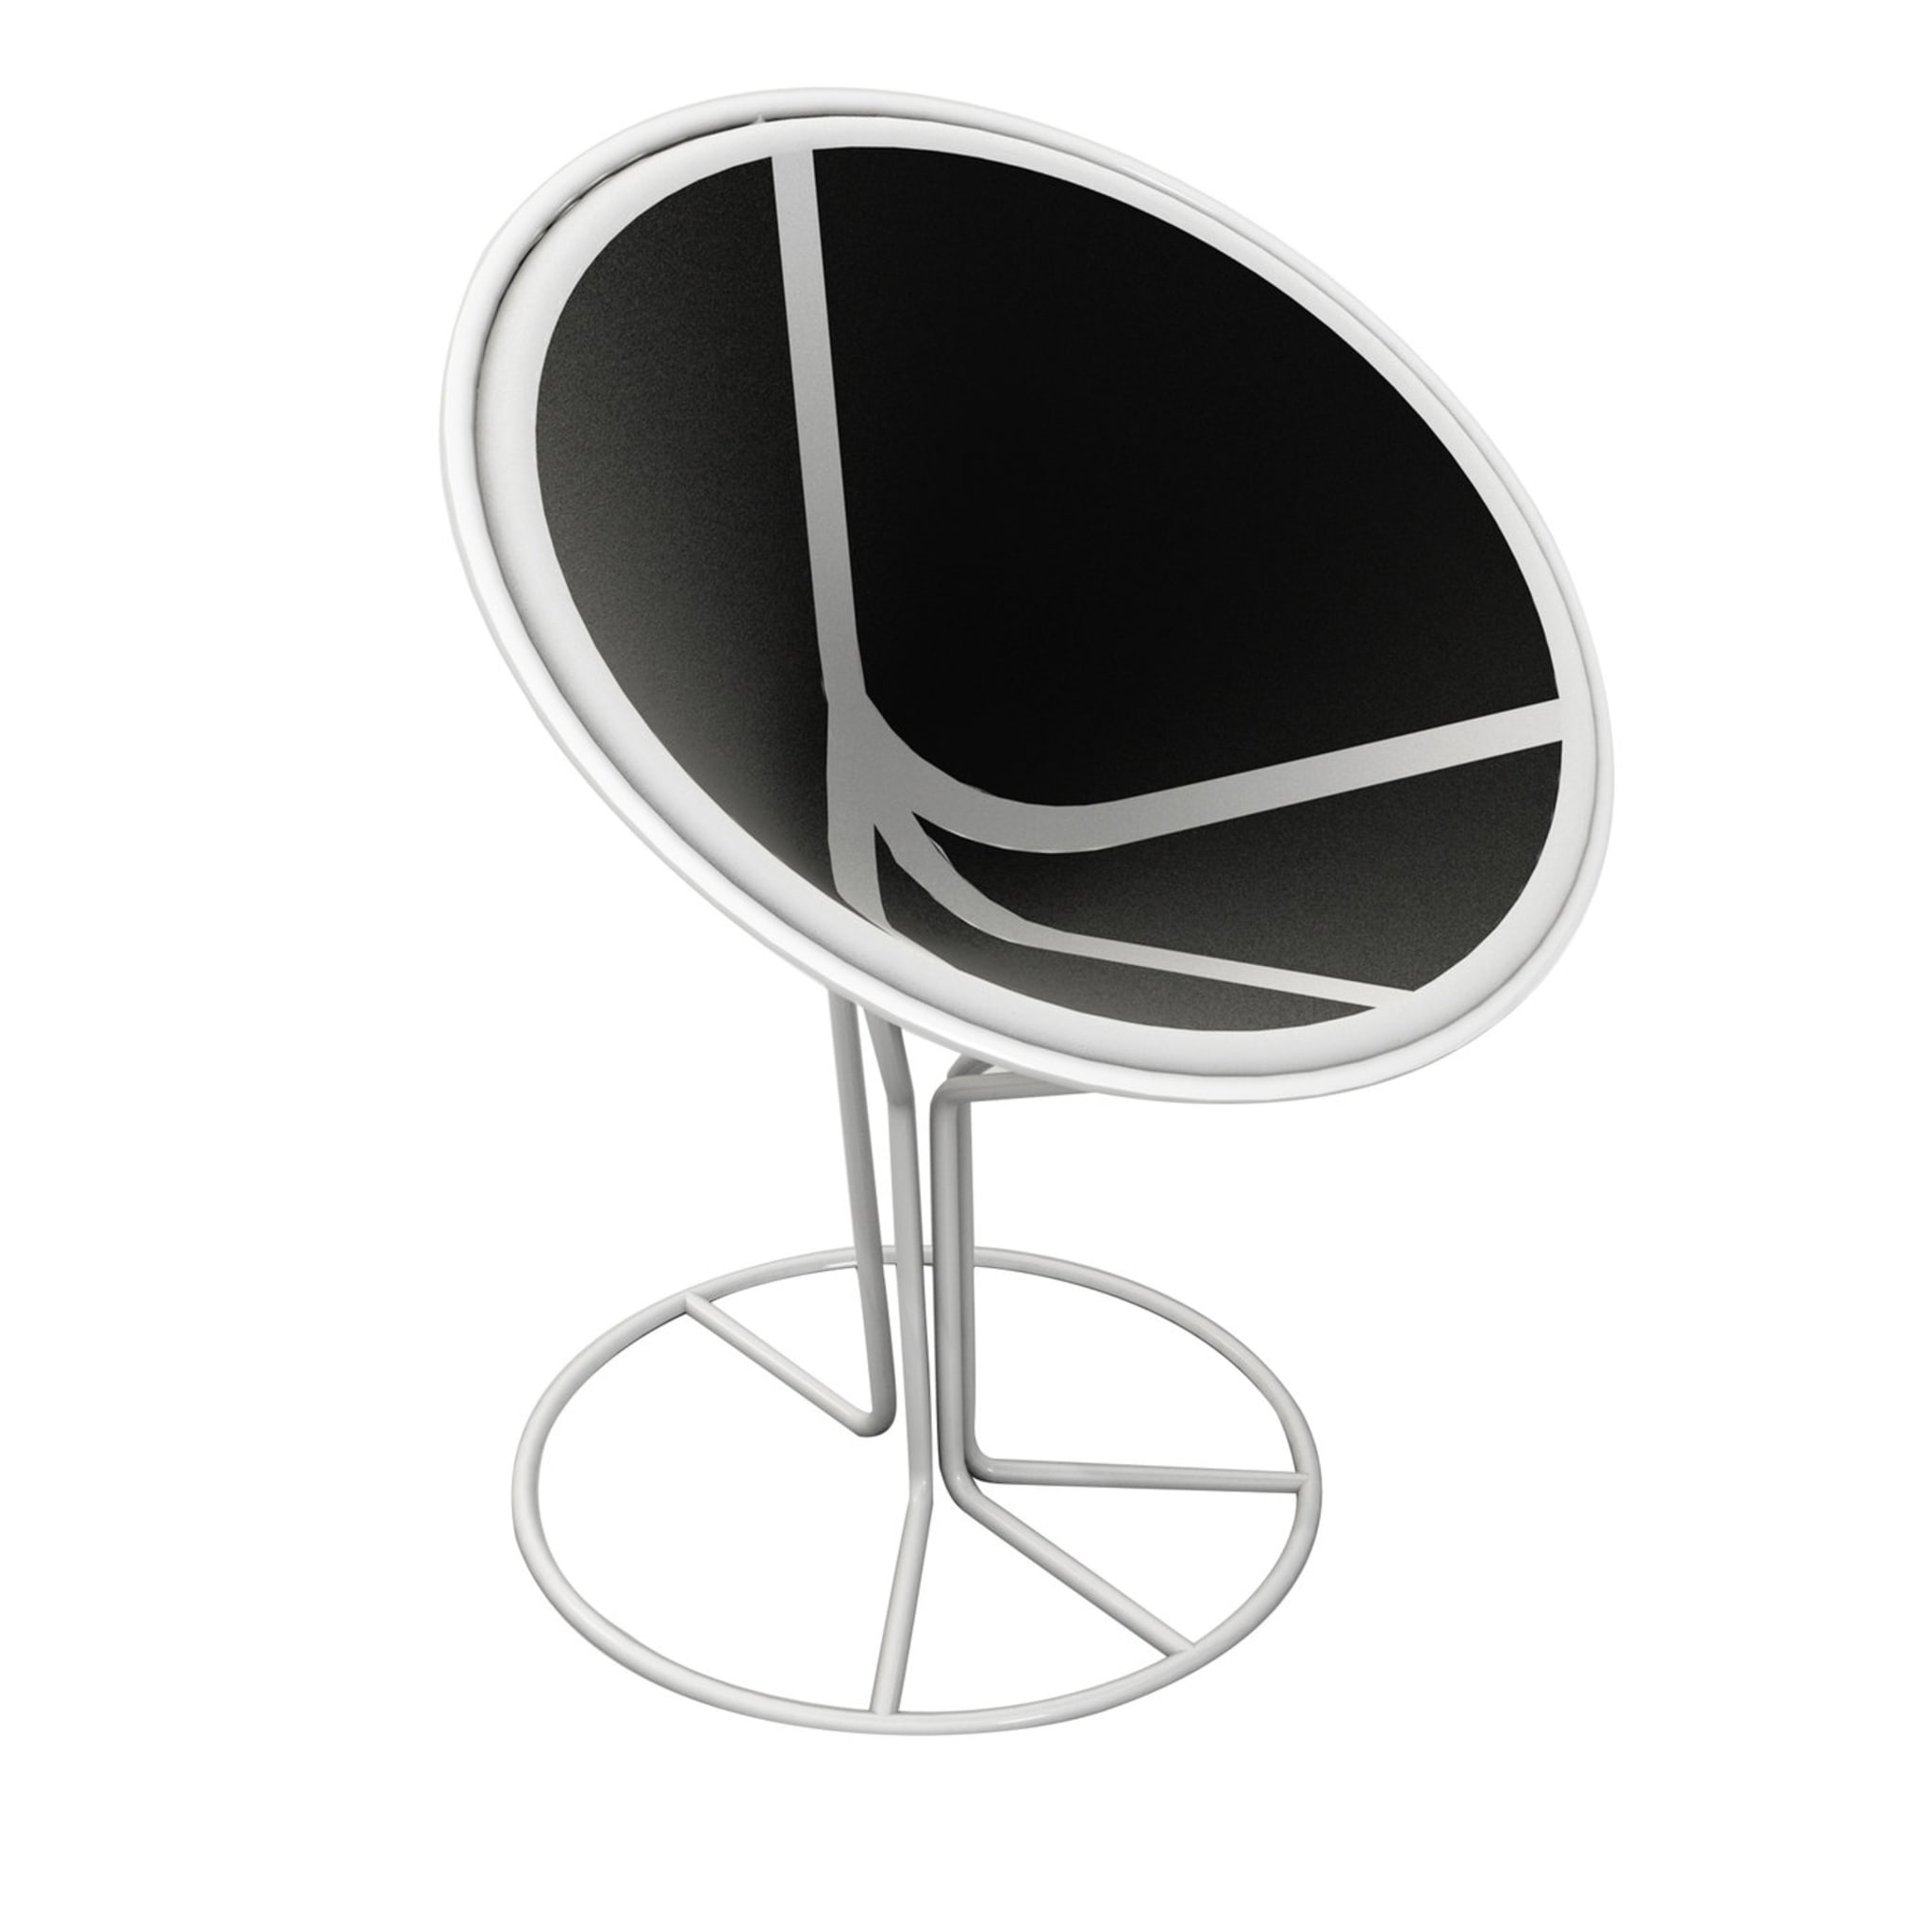 Pace Black Chair by Garilab by Piter Perbellini - Main view